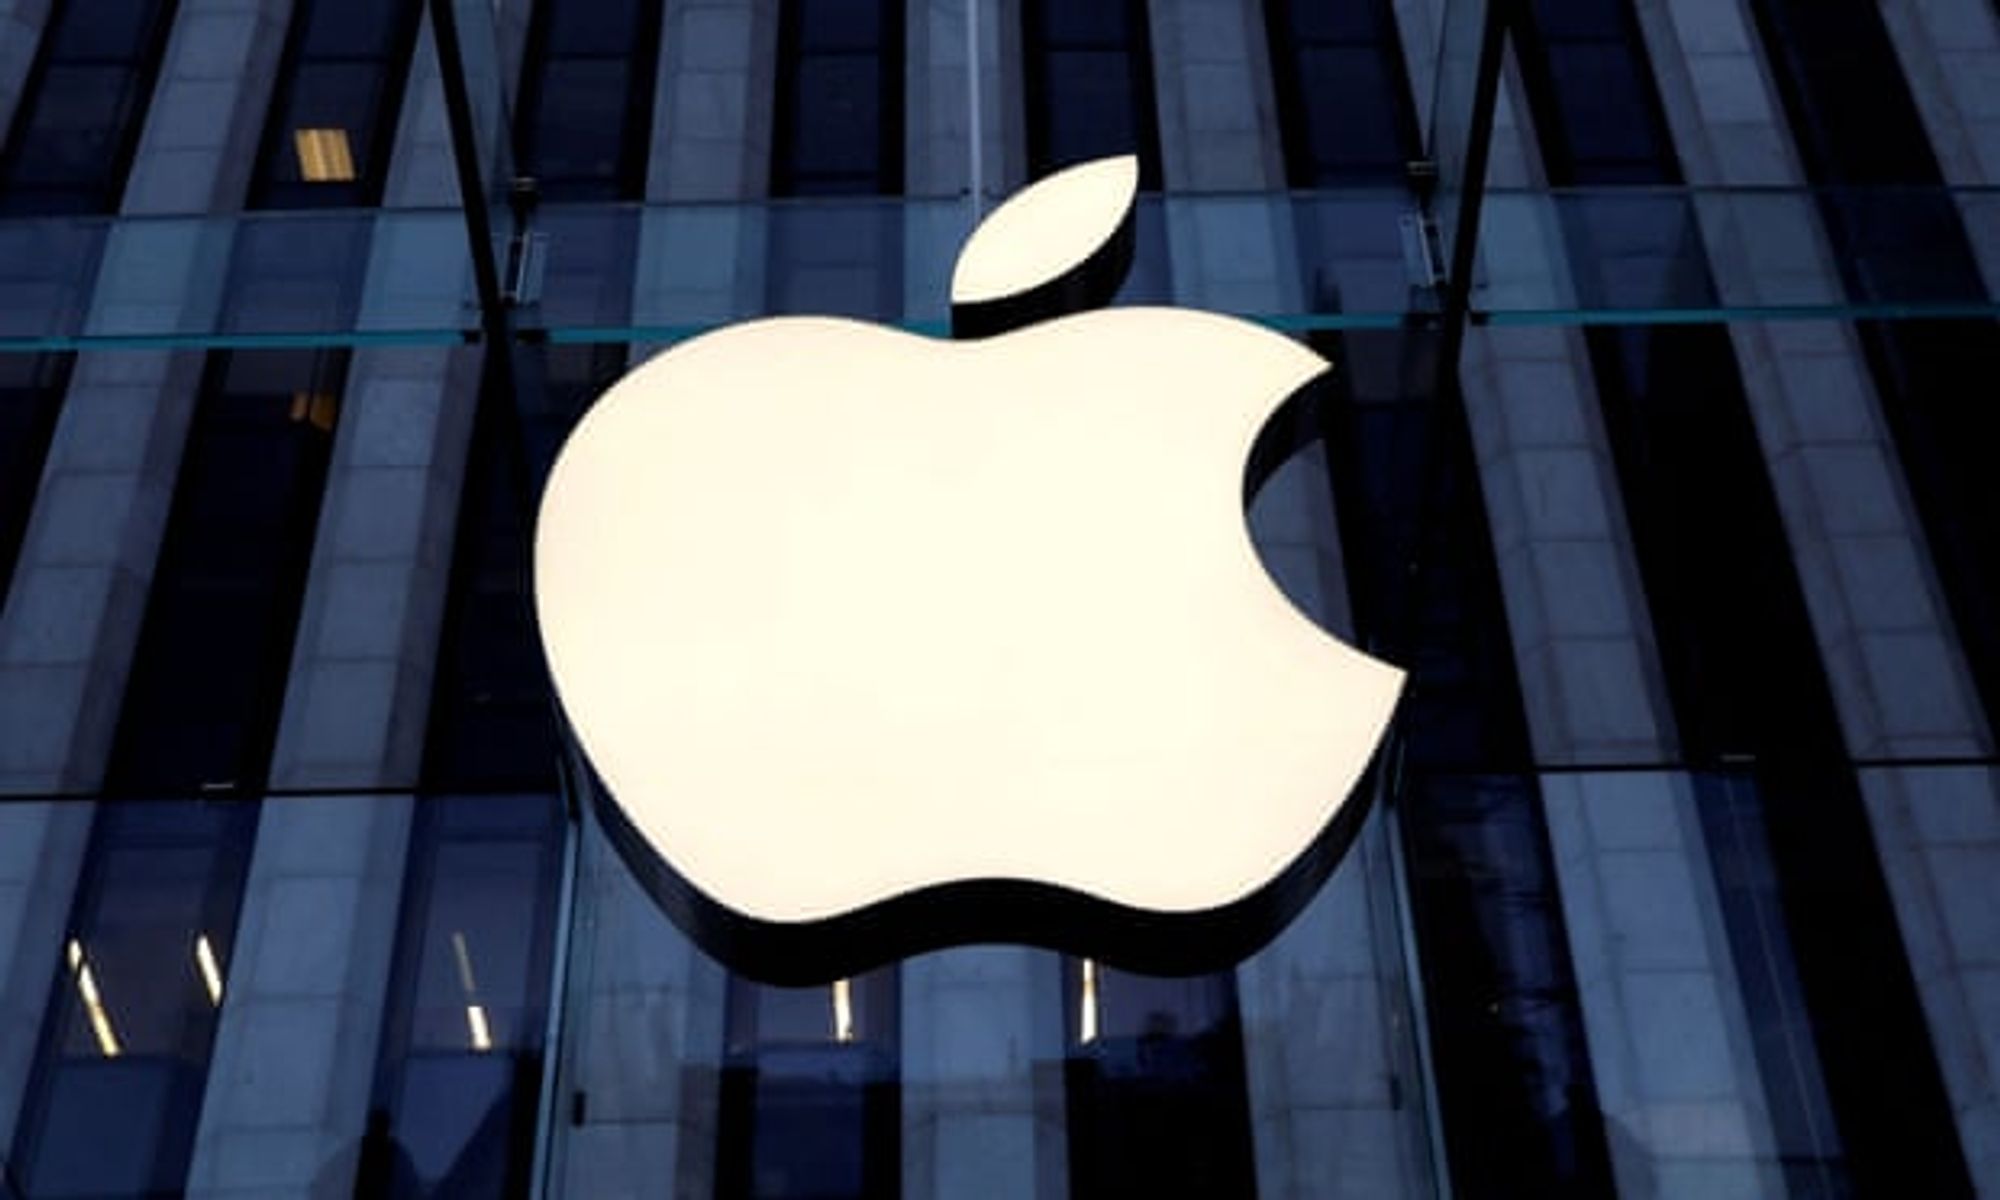 Apple says it prioritizes privacy. Experts say gaps remain | Technology | The Guardian